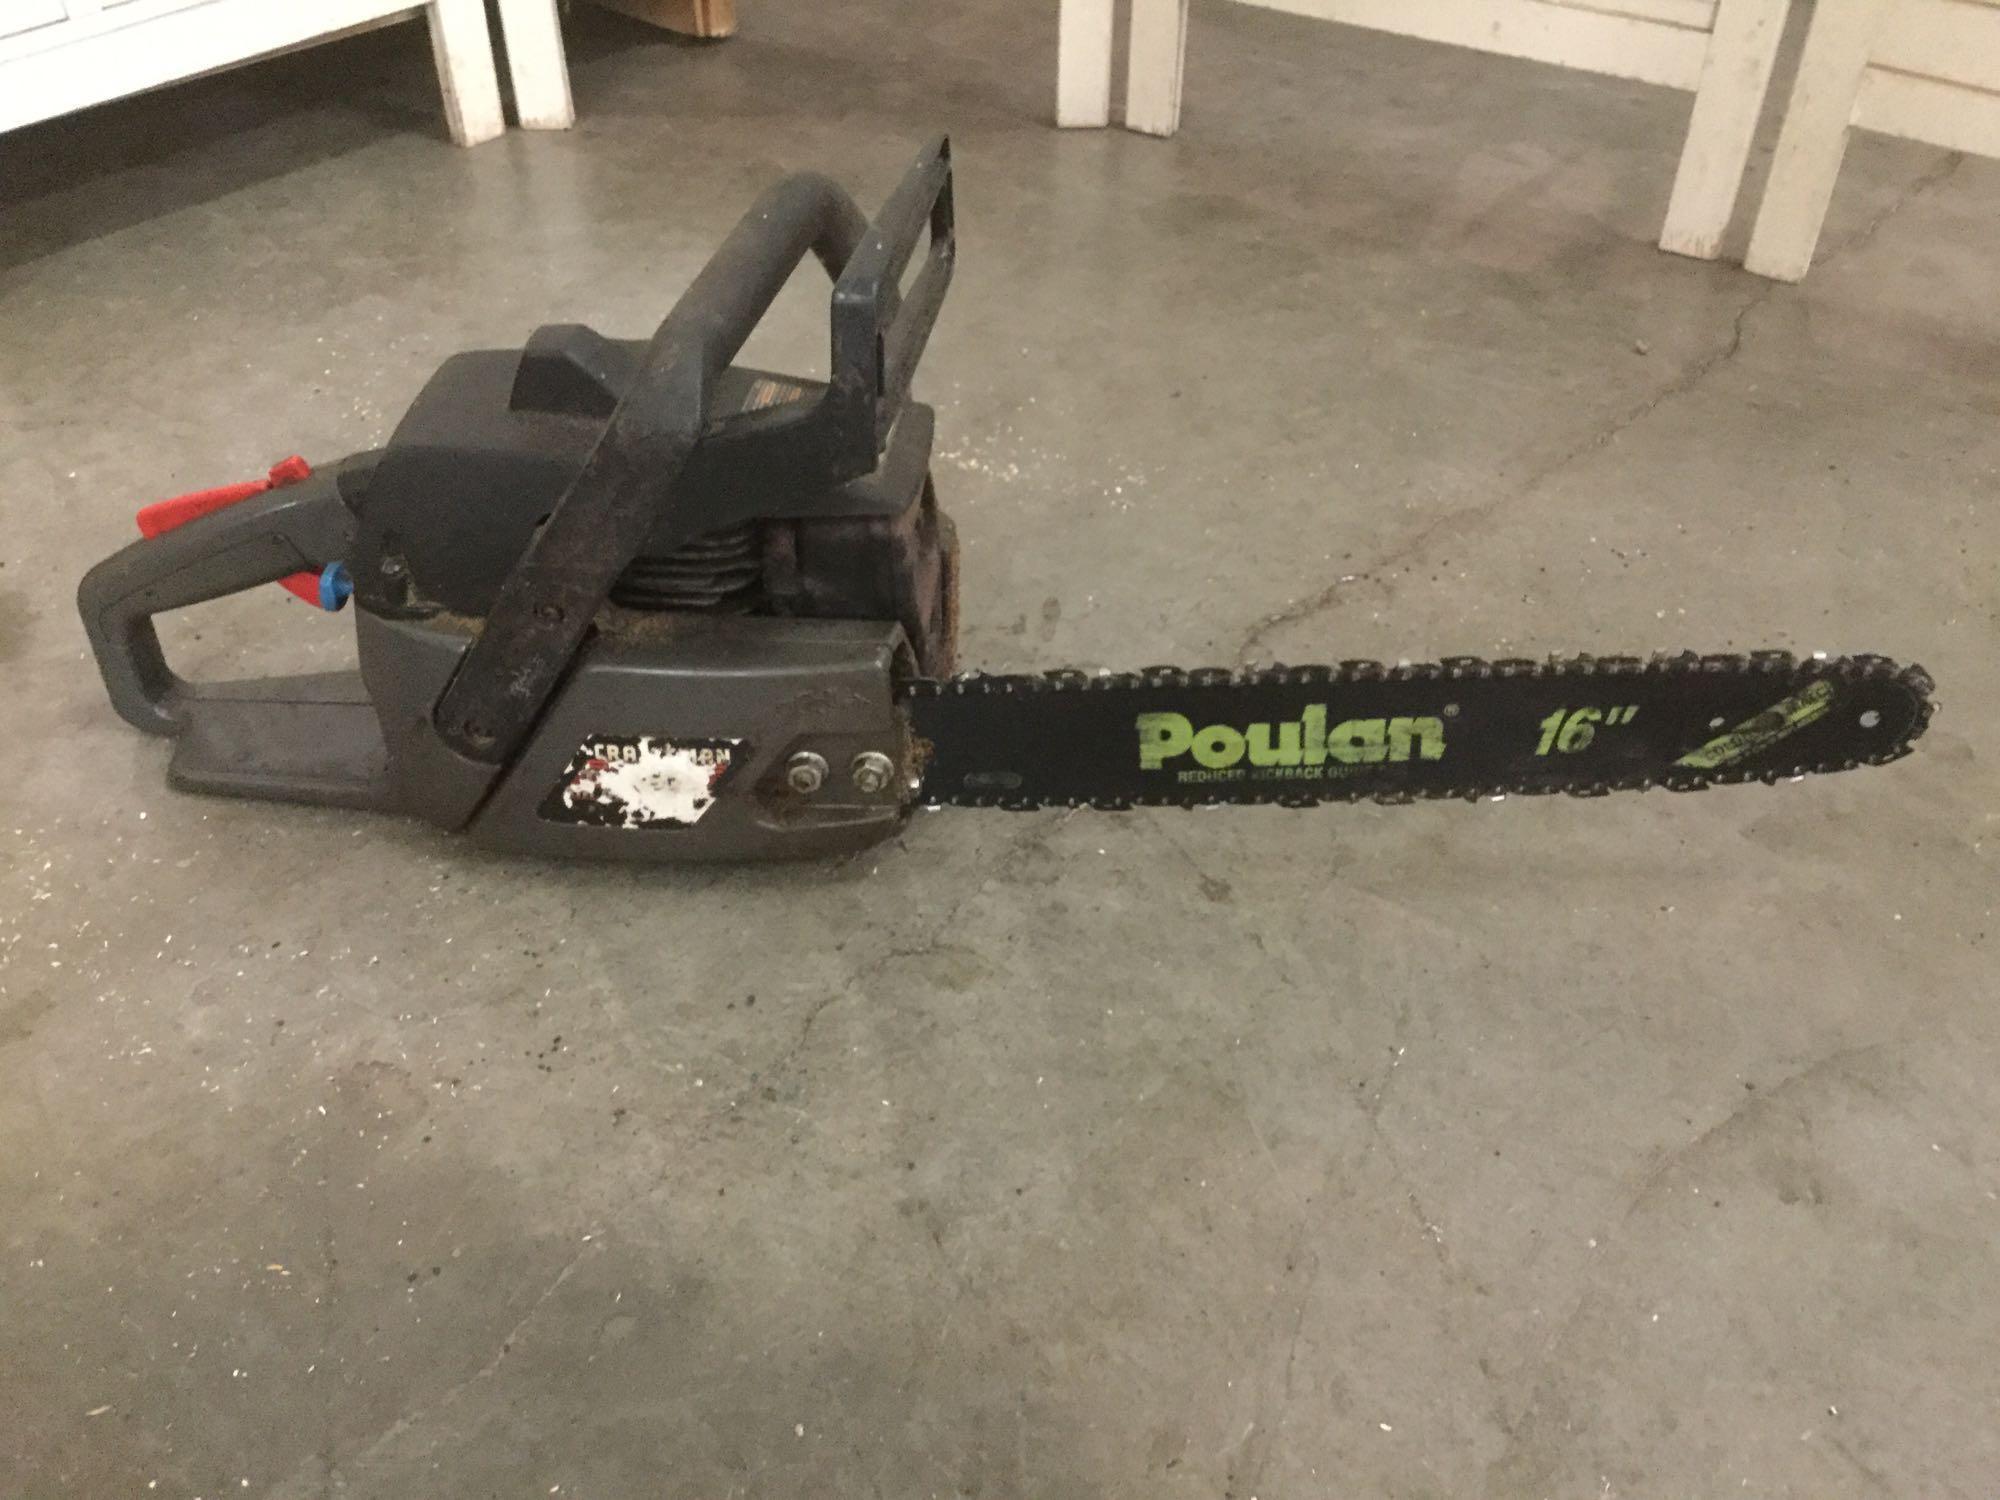 Sears Craftsman 14 inch gas operated chainsaw, with Poulan 16 inch reduced kickback guide